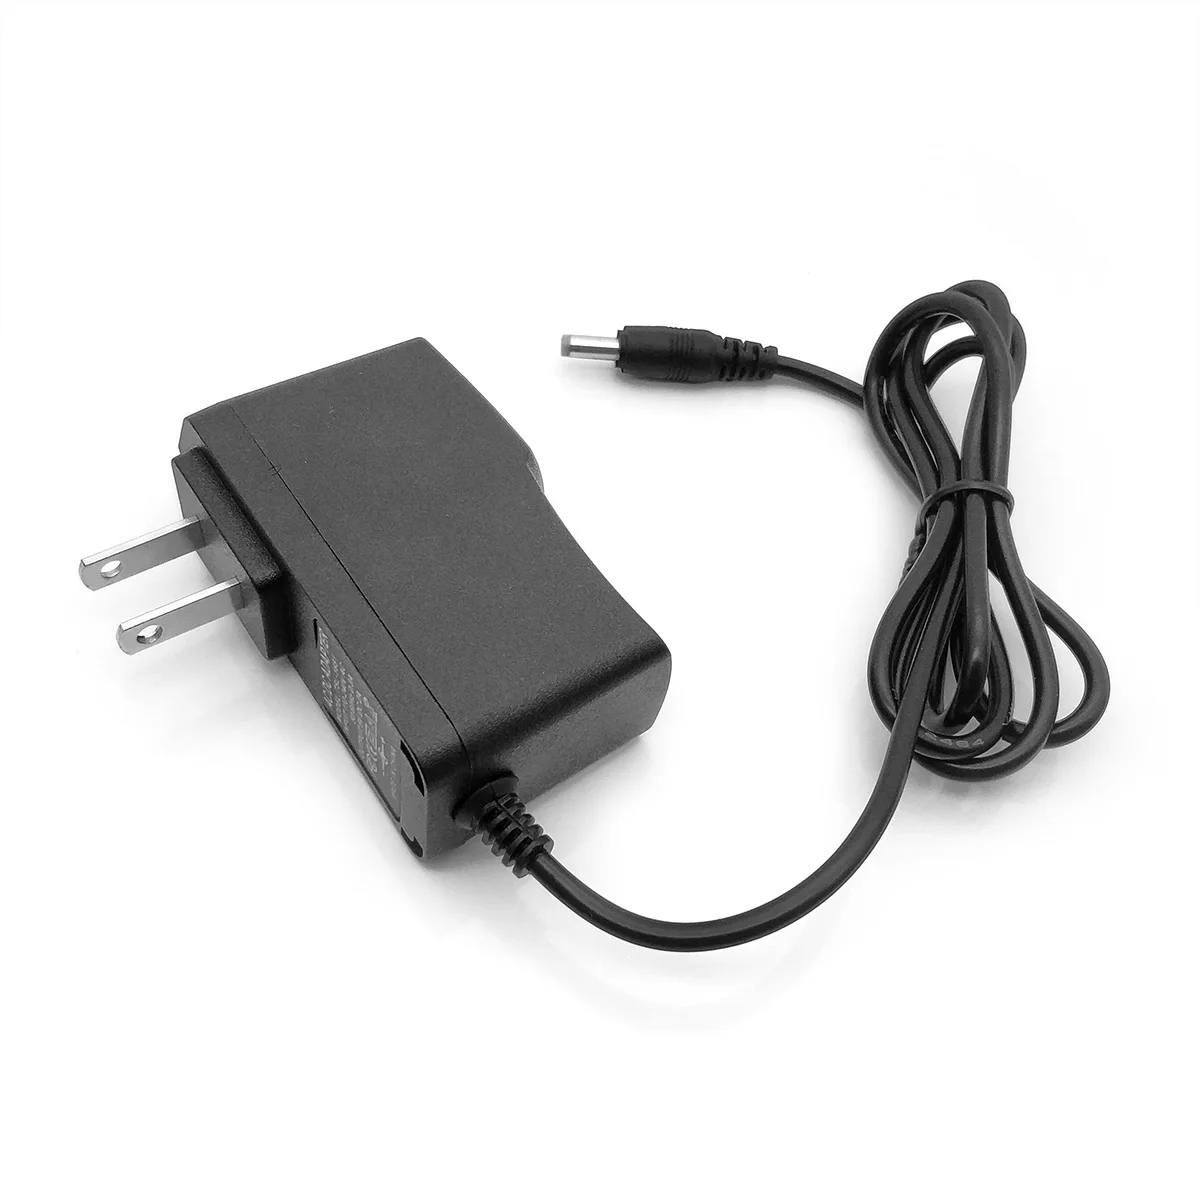 
AC DC Power Adapter 9V 5V 4.5V 4.2V 1A 1.5A 2A 3A OEM Input 100 240V AC 50/60Hz Power Supply Adapter for CCTV 